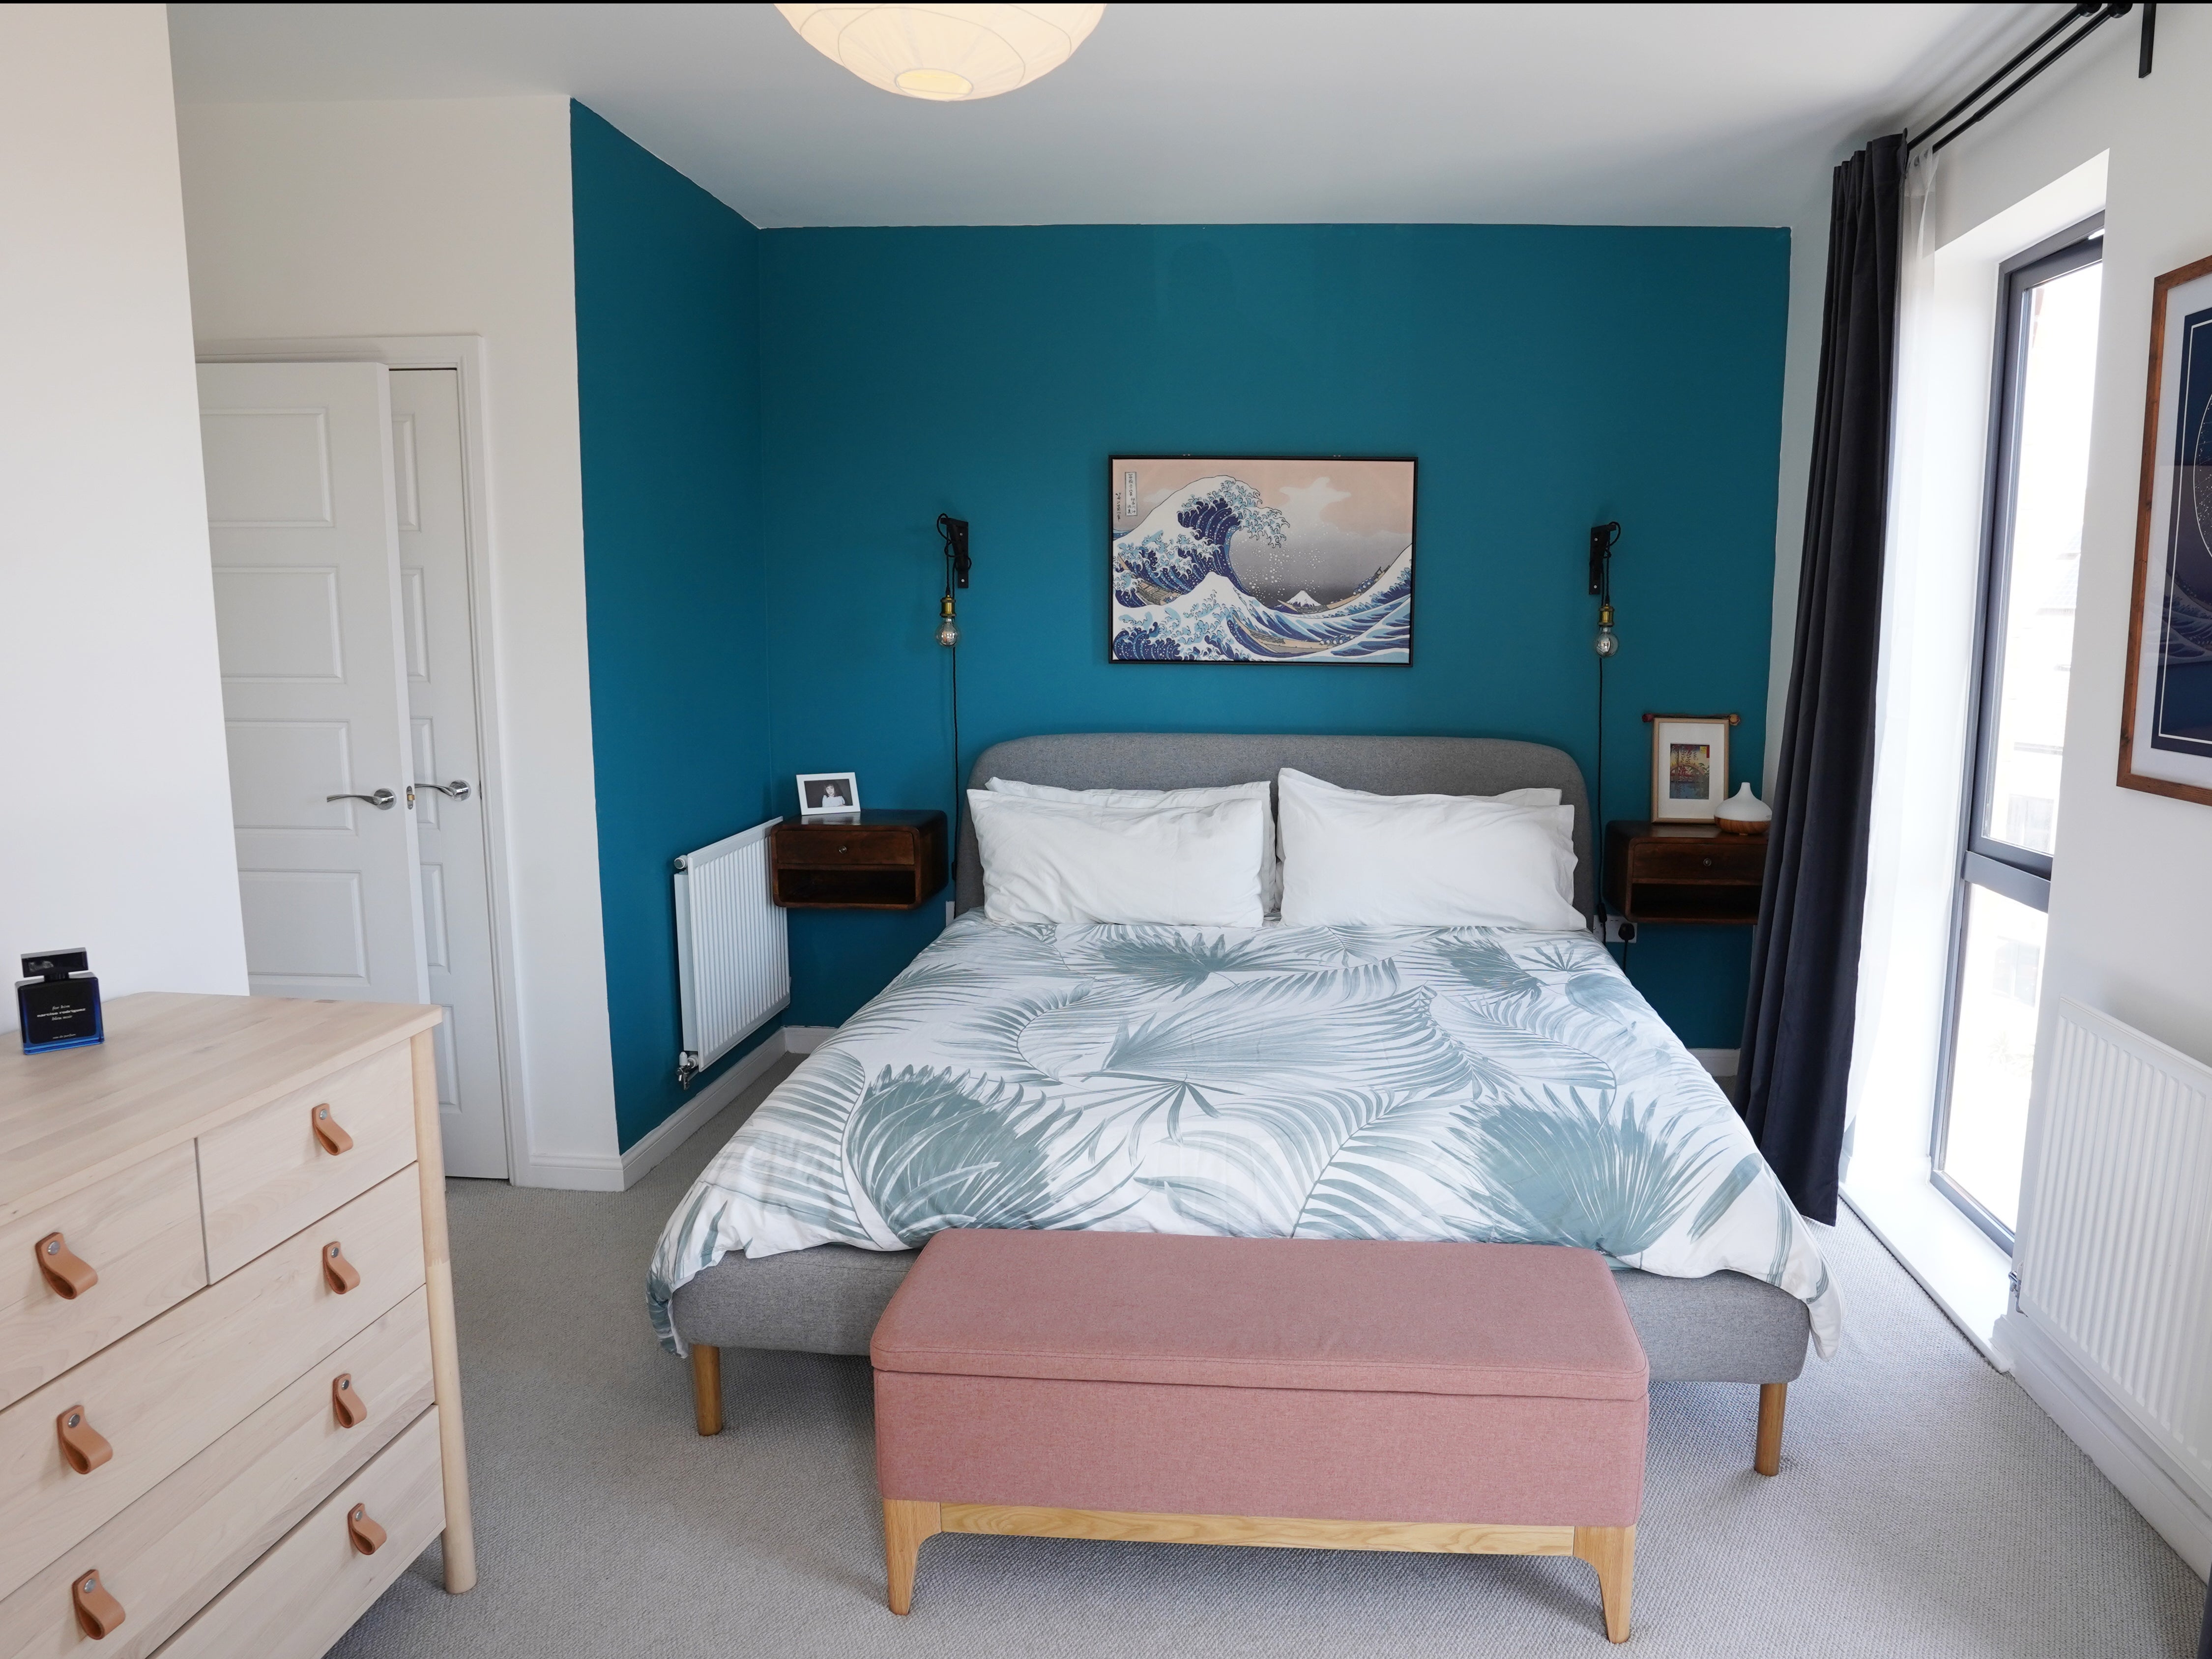 A view of one of three bedrooms inside the Coulsdon townhouse being raffled off for £3